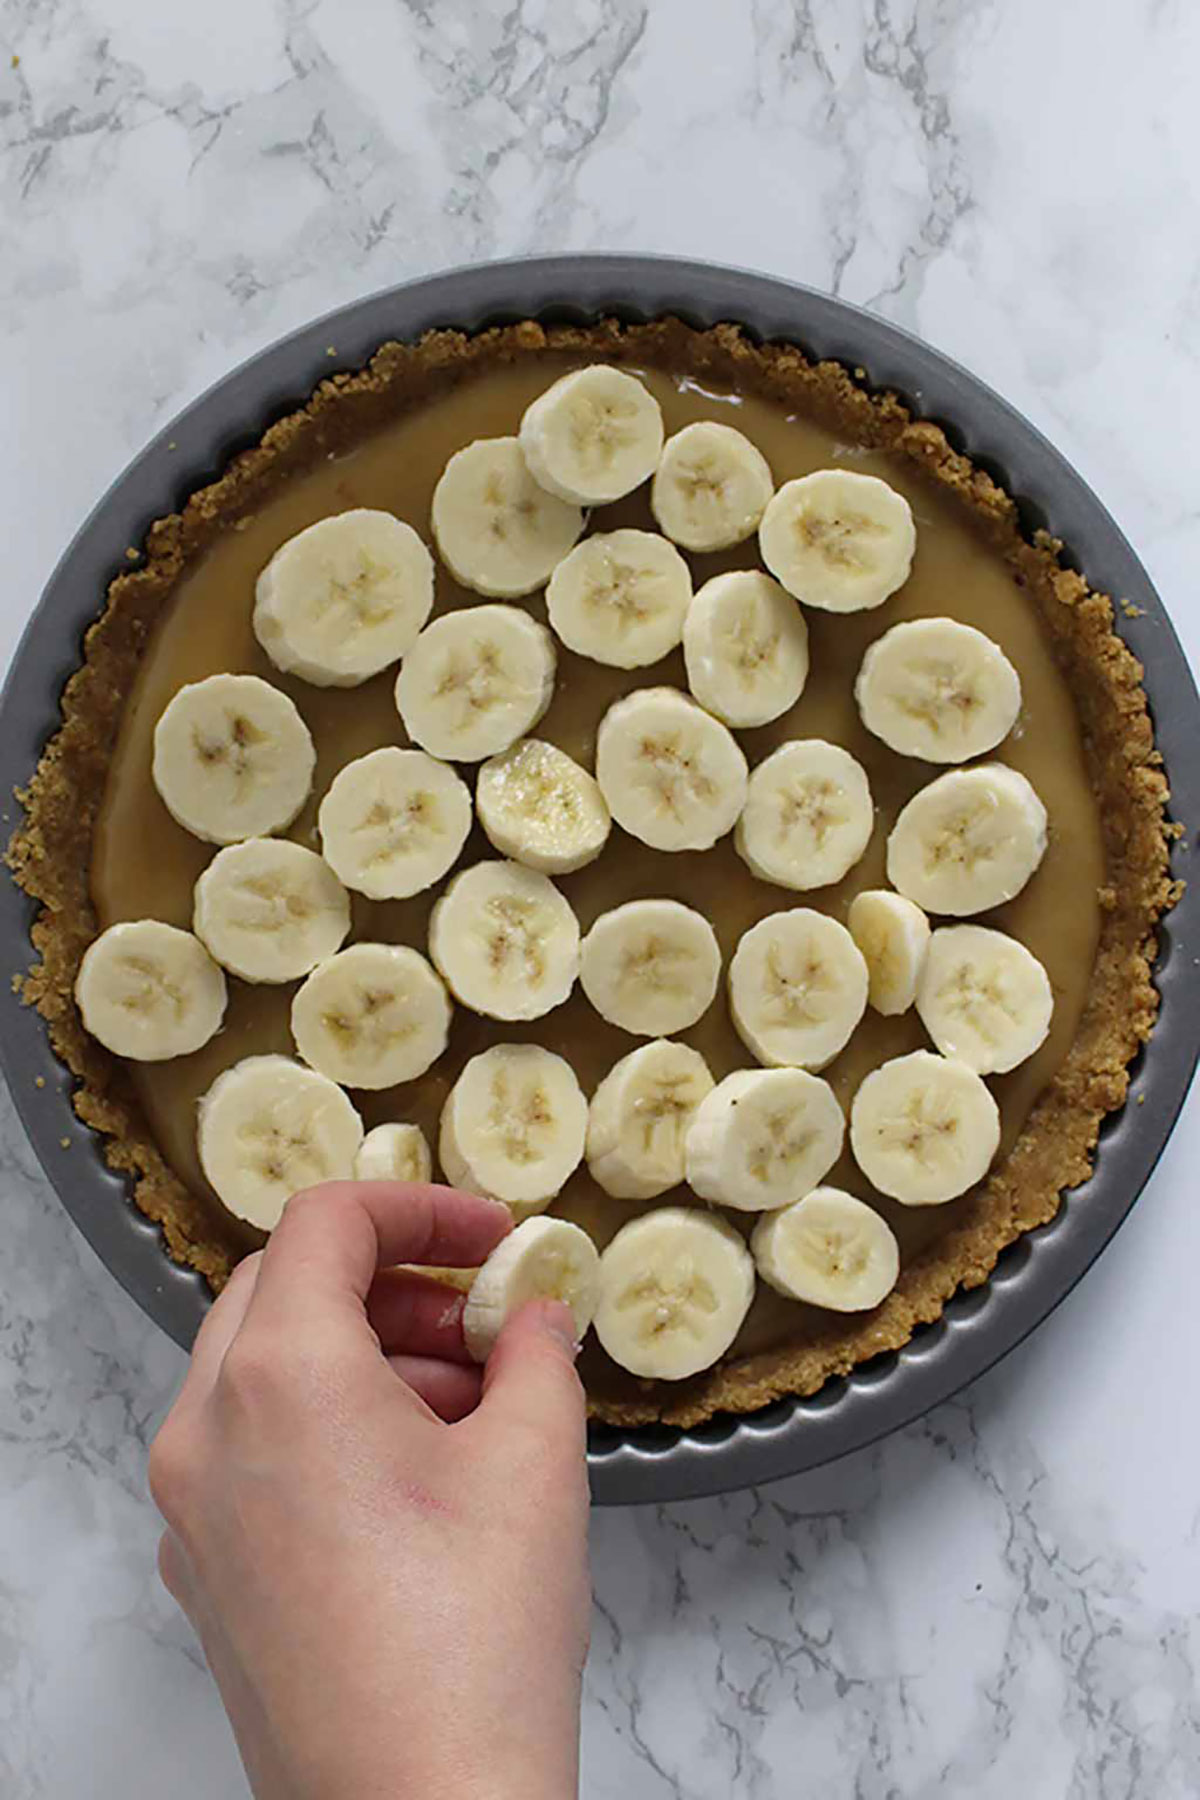 Placing Bananas On Top Of The Caramel